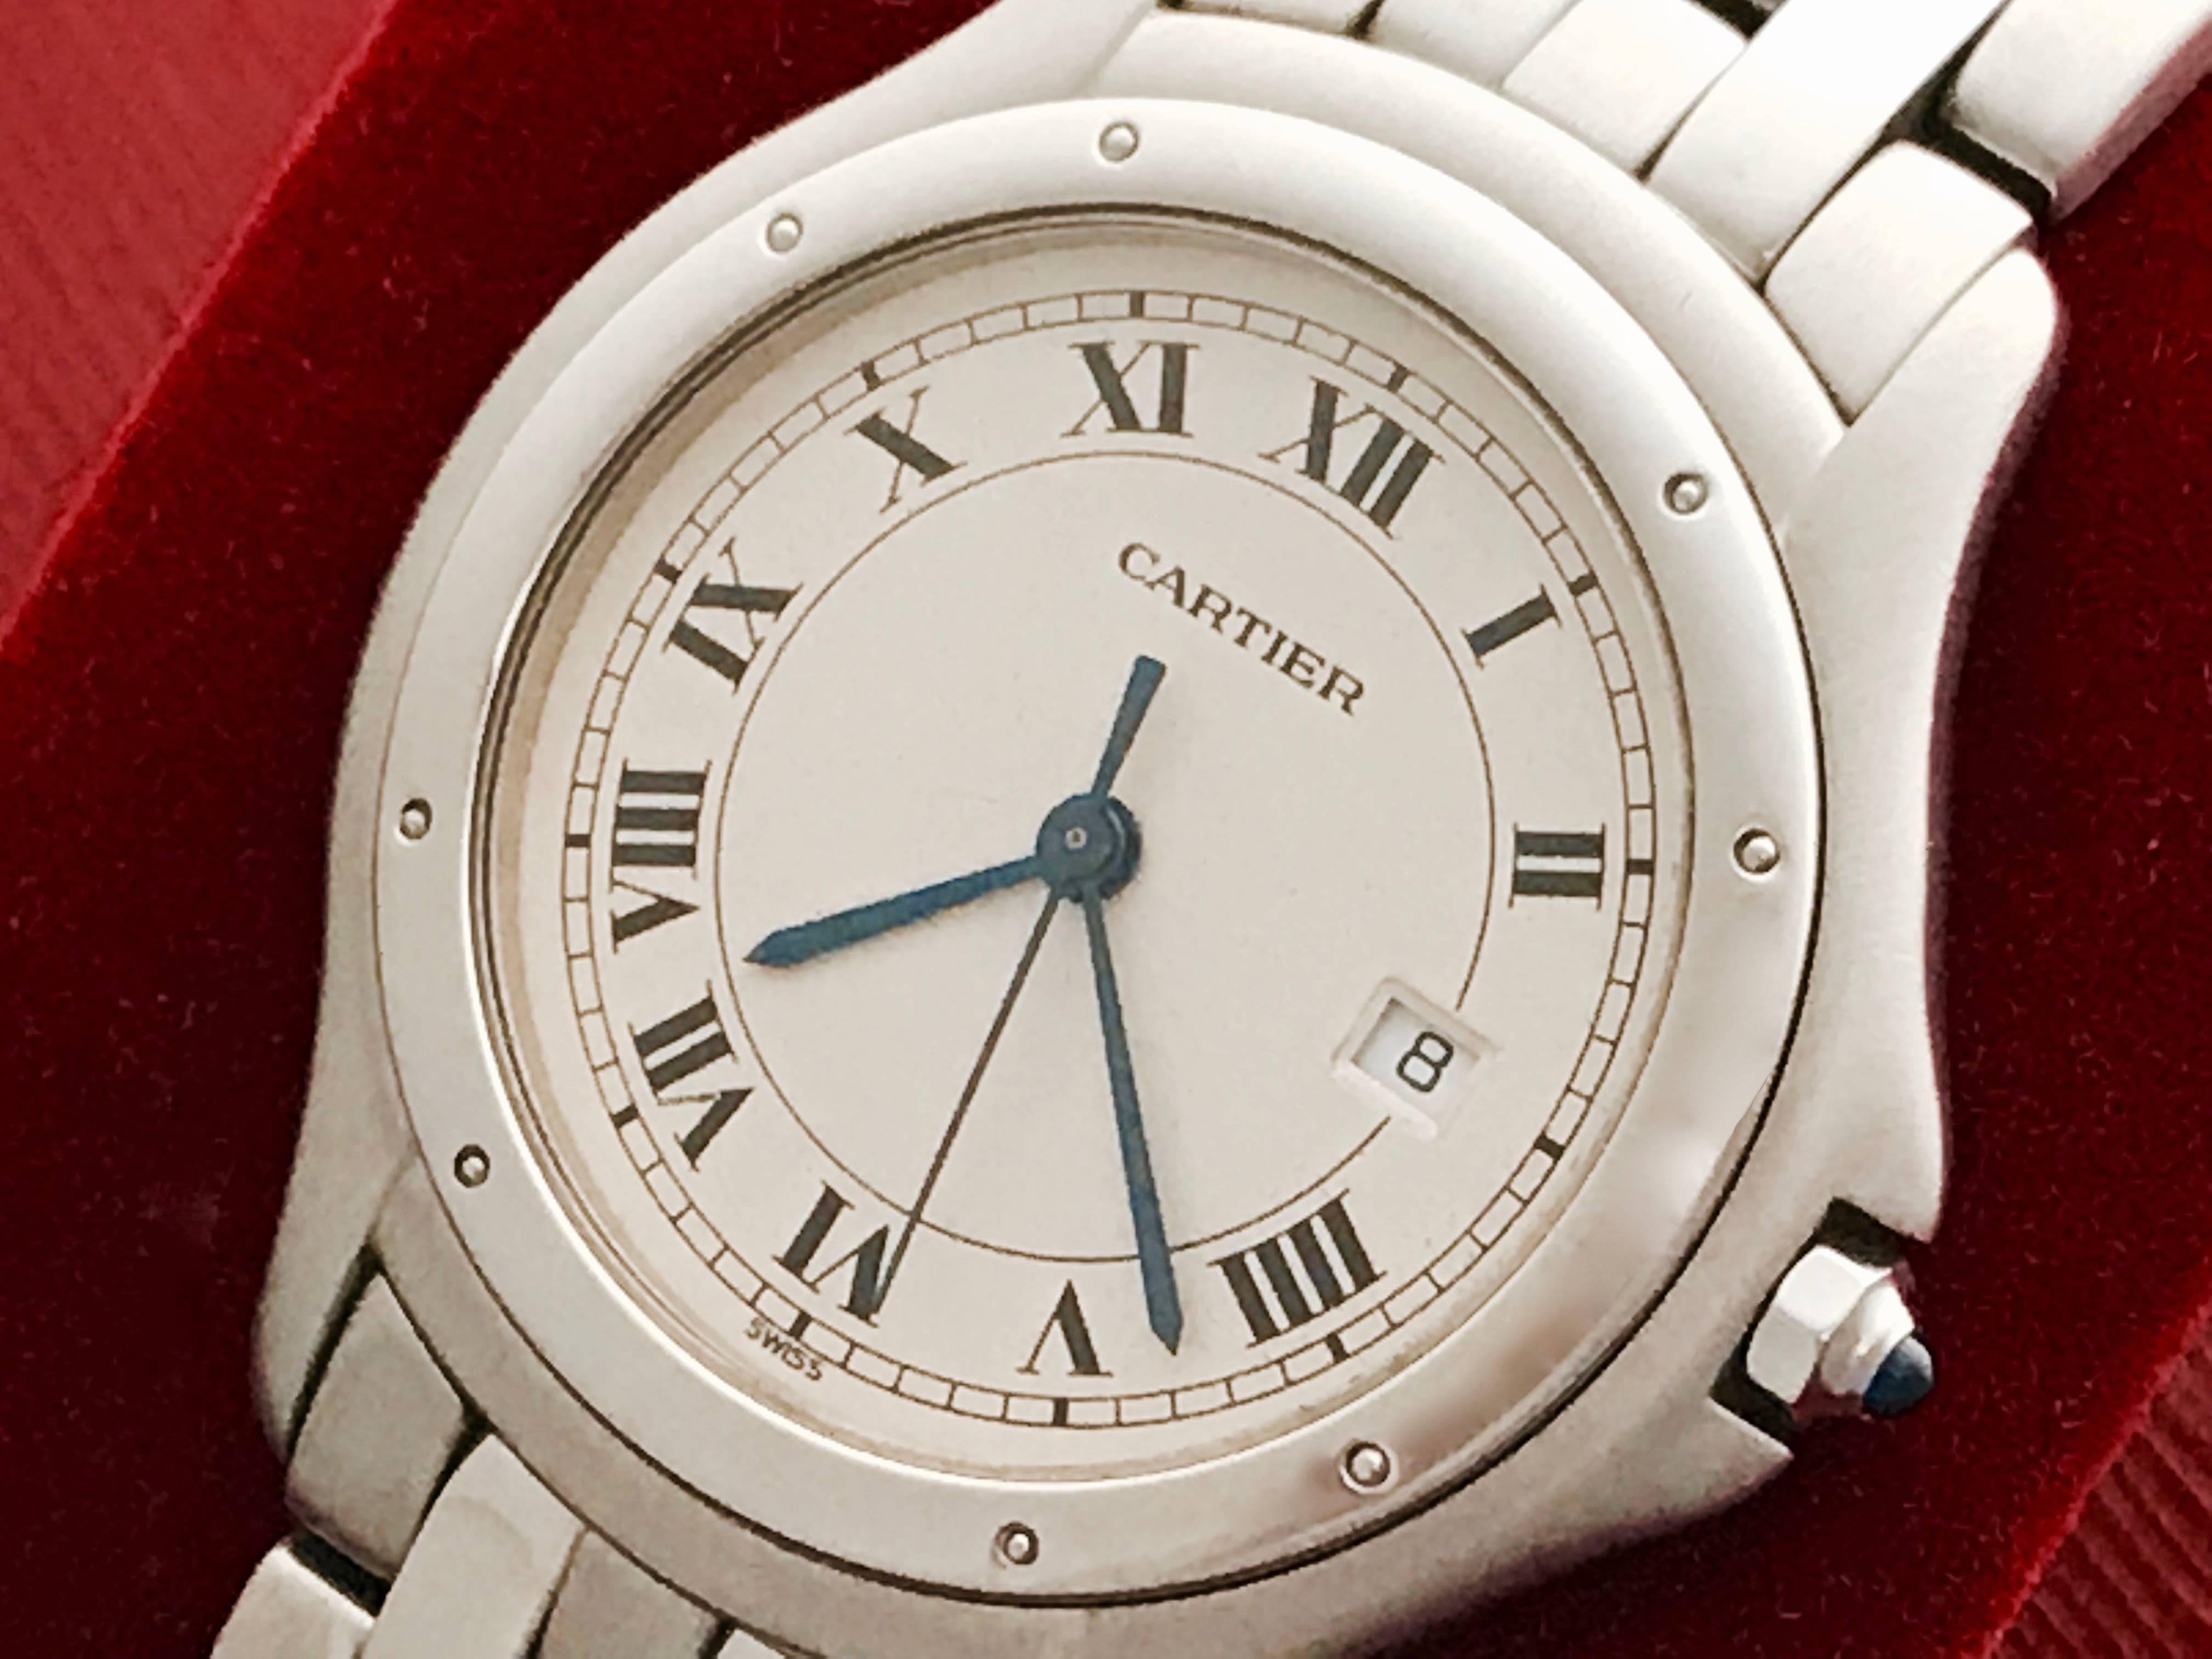 Cartier Cougar Midsize Stainless Steel Quartz Wrist Watch.  Certified pre-owned and ready to ship.  Quartz movement with date.  Stainless Steel round case (33mm dia.).  Stainless Steel Cartier bracelet with deployant clasp. Off-White Dial with black